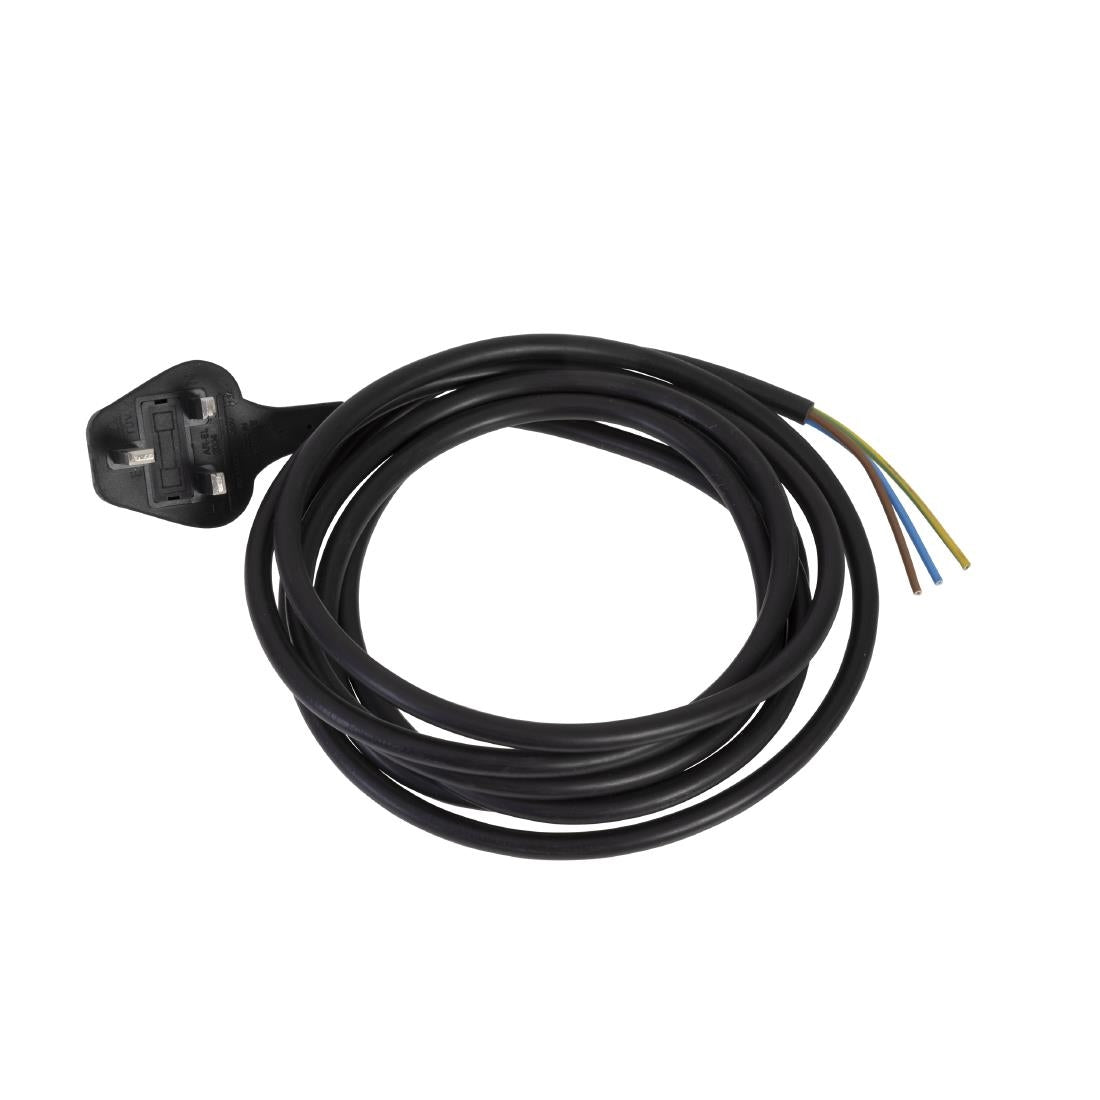 AT067 Buffalo 600 Series Supply Cable With UK Plug